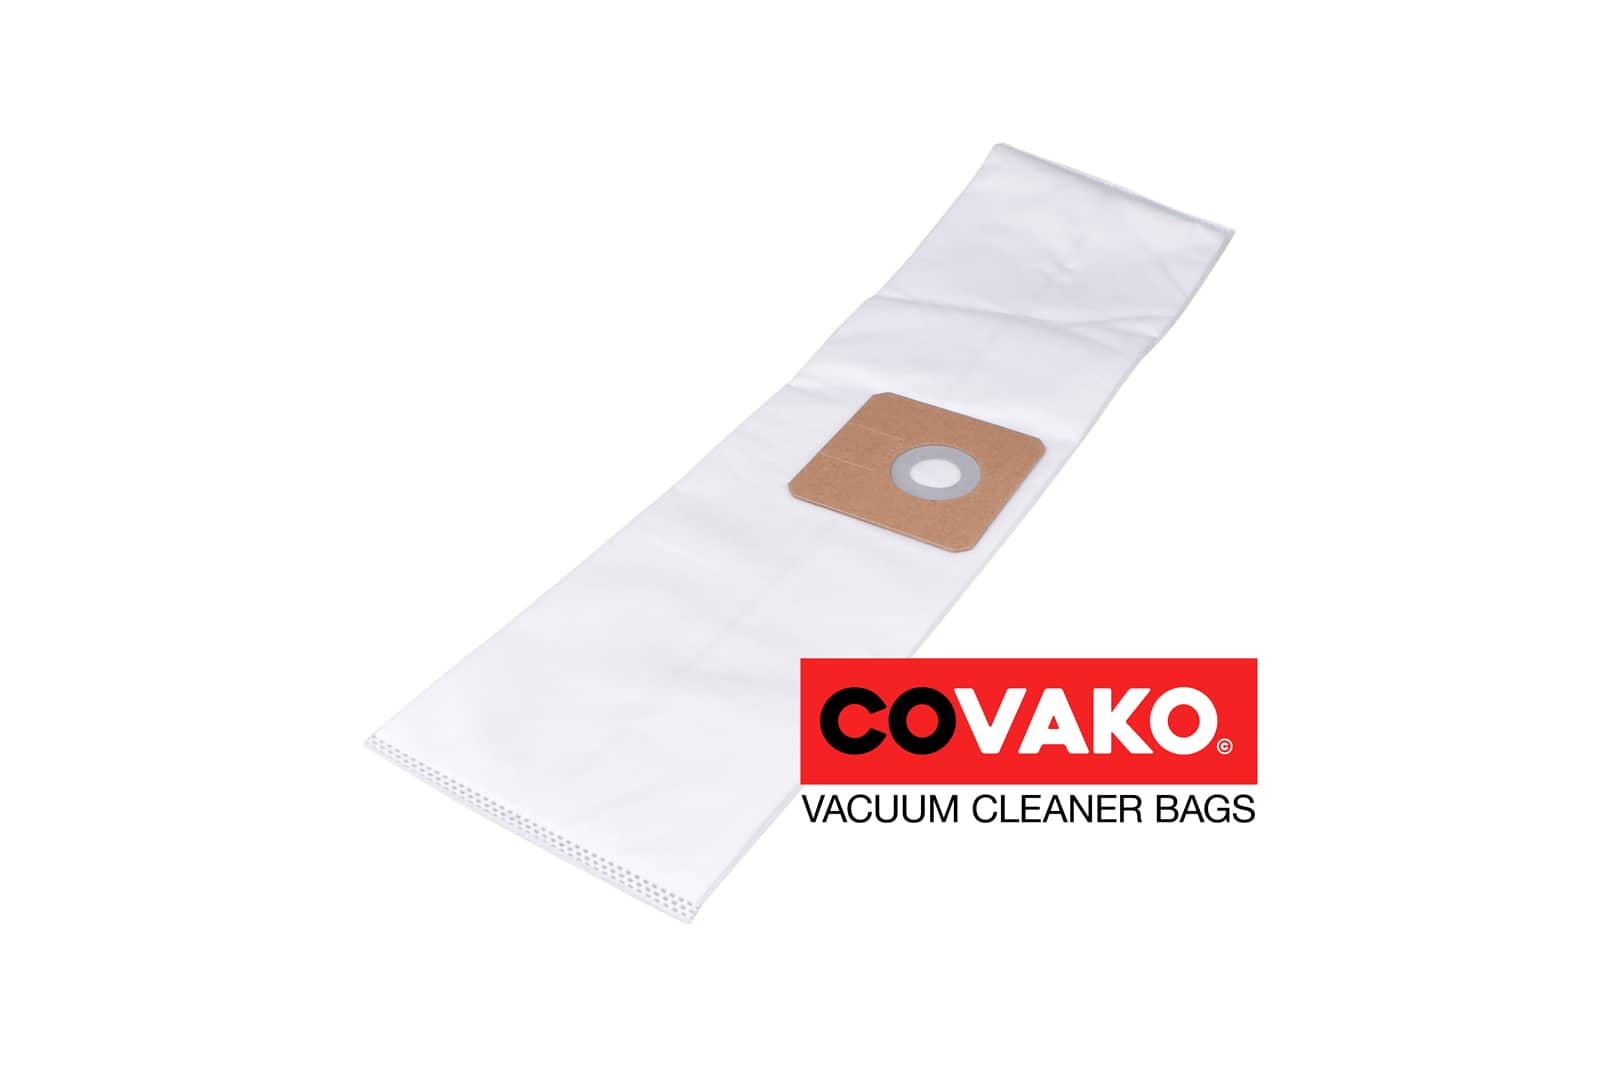 Cleancraft flexCat 112 Q / Synthesis - Cleancraft vacuum cleaner bags